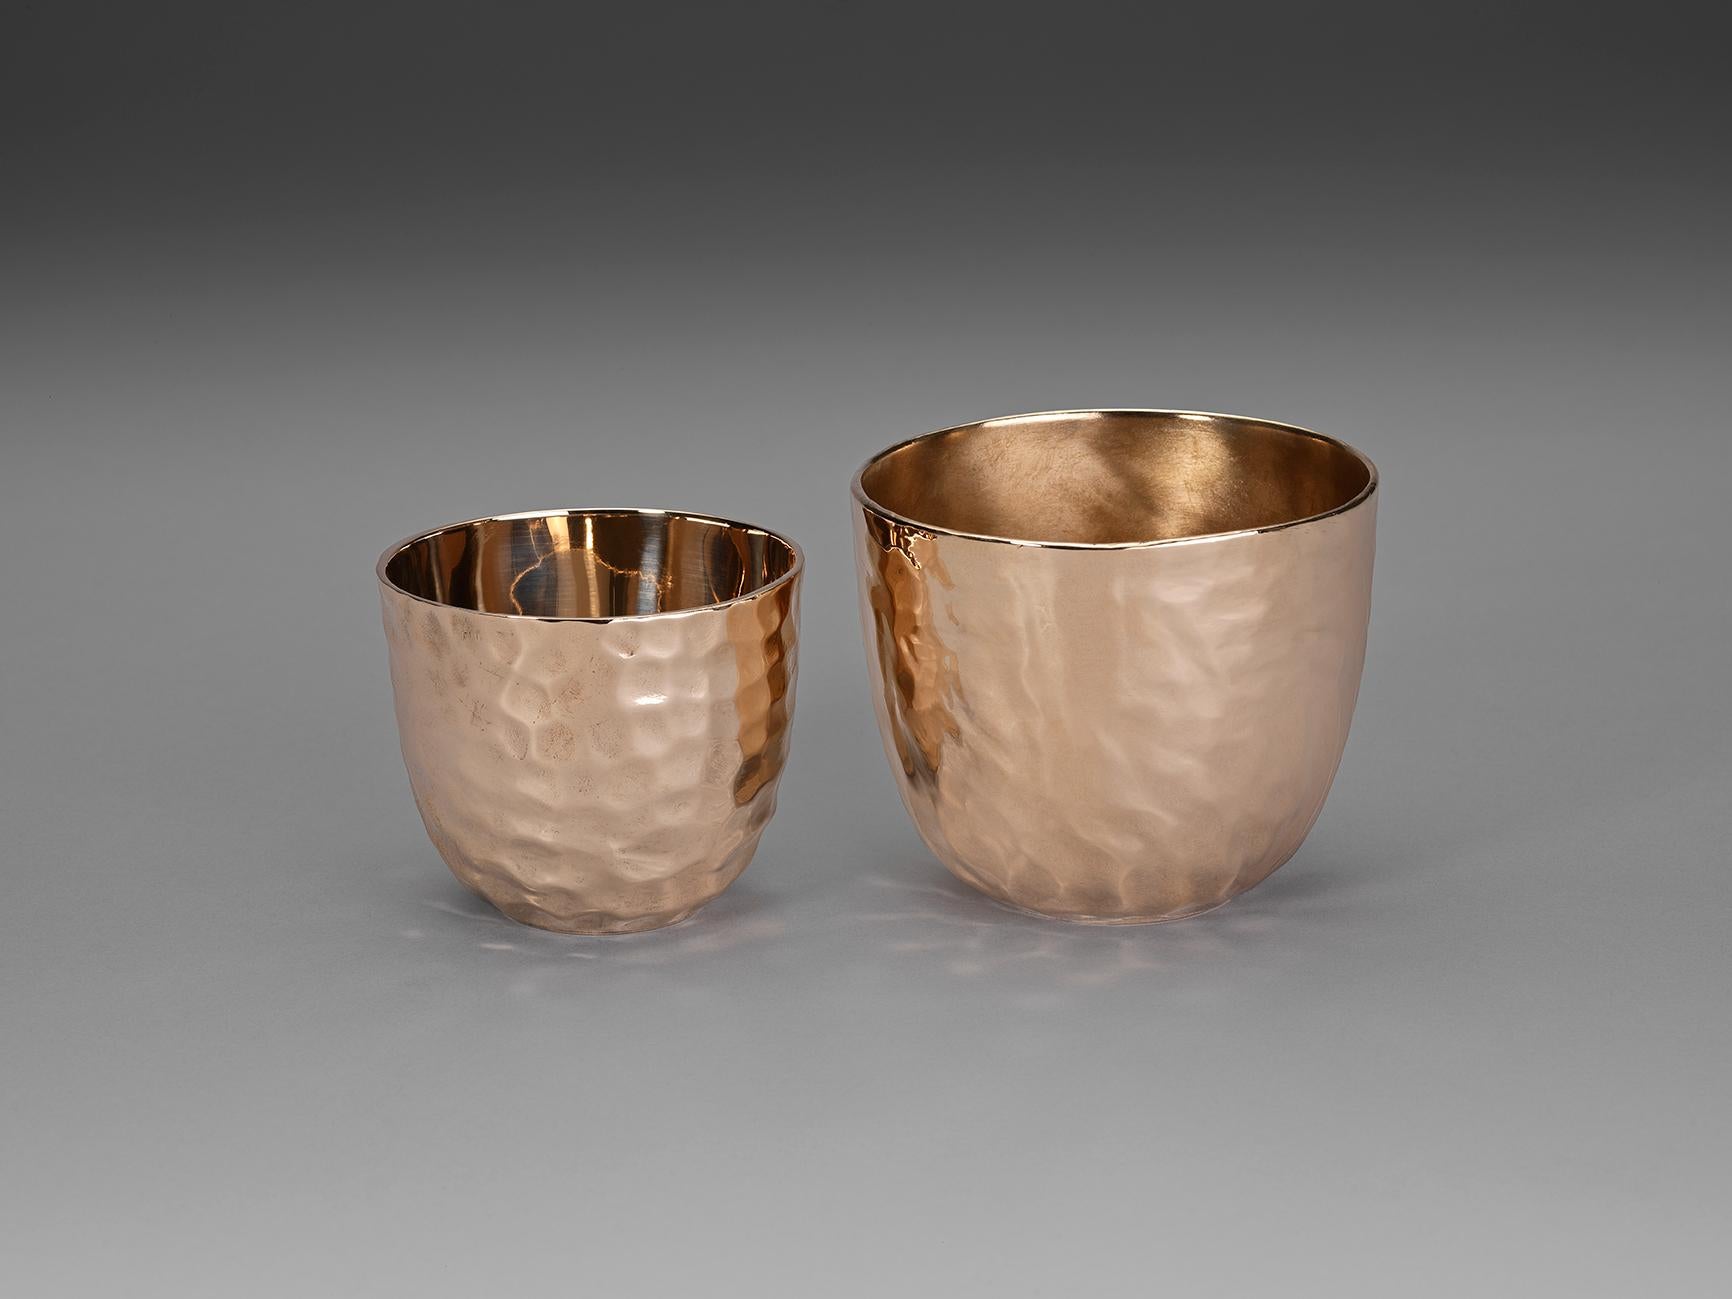 A highly polished bronze cup with hand-wrought exterior. It holds 250ml